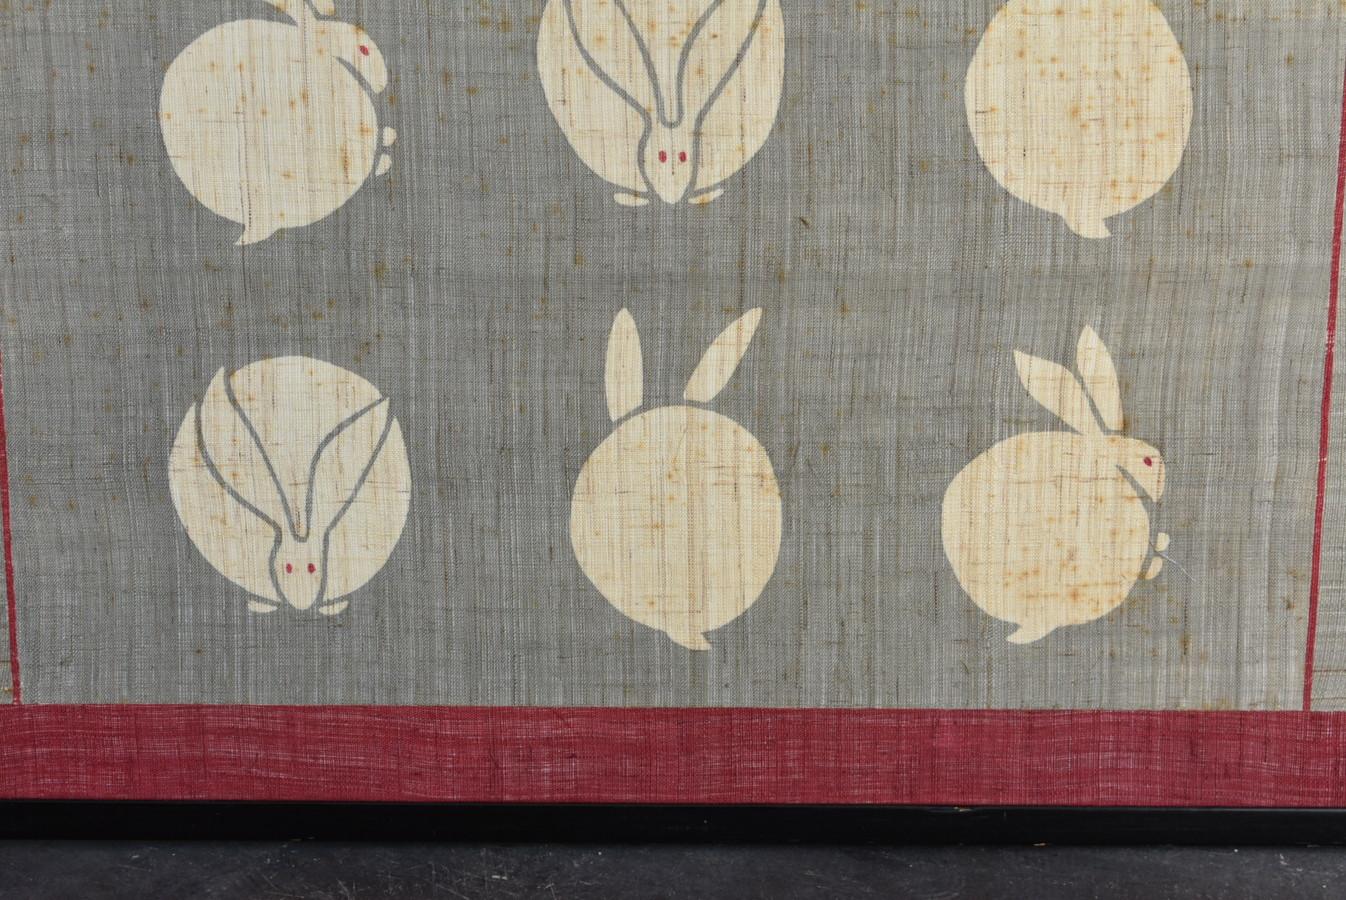 Cotton Japanese Folding Screen with Moon and Rabbit Drawn on Cloth/Old Partition/20th